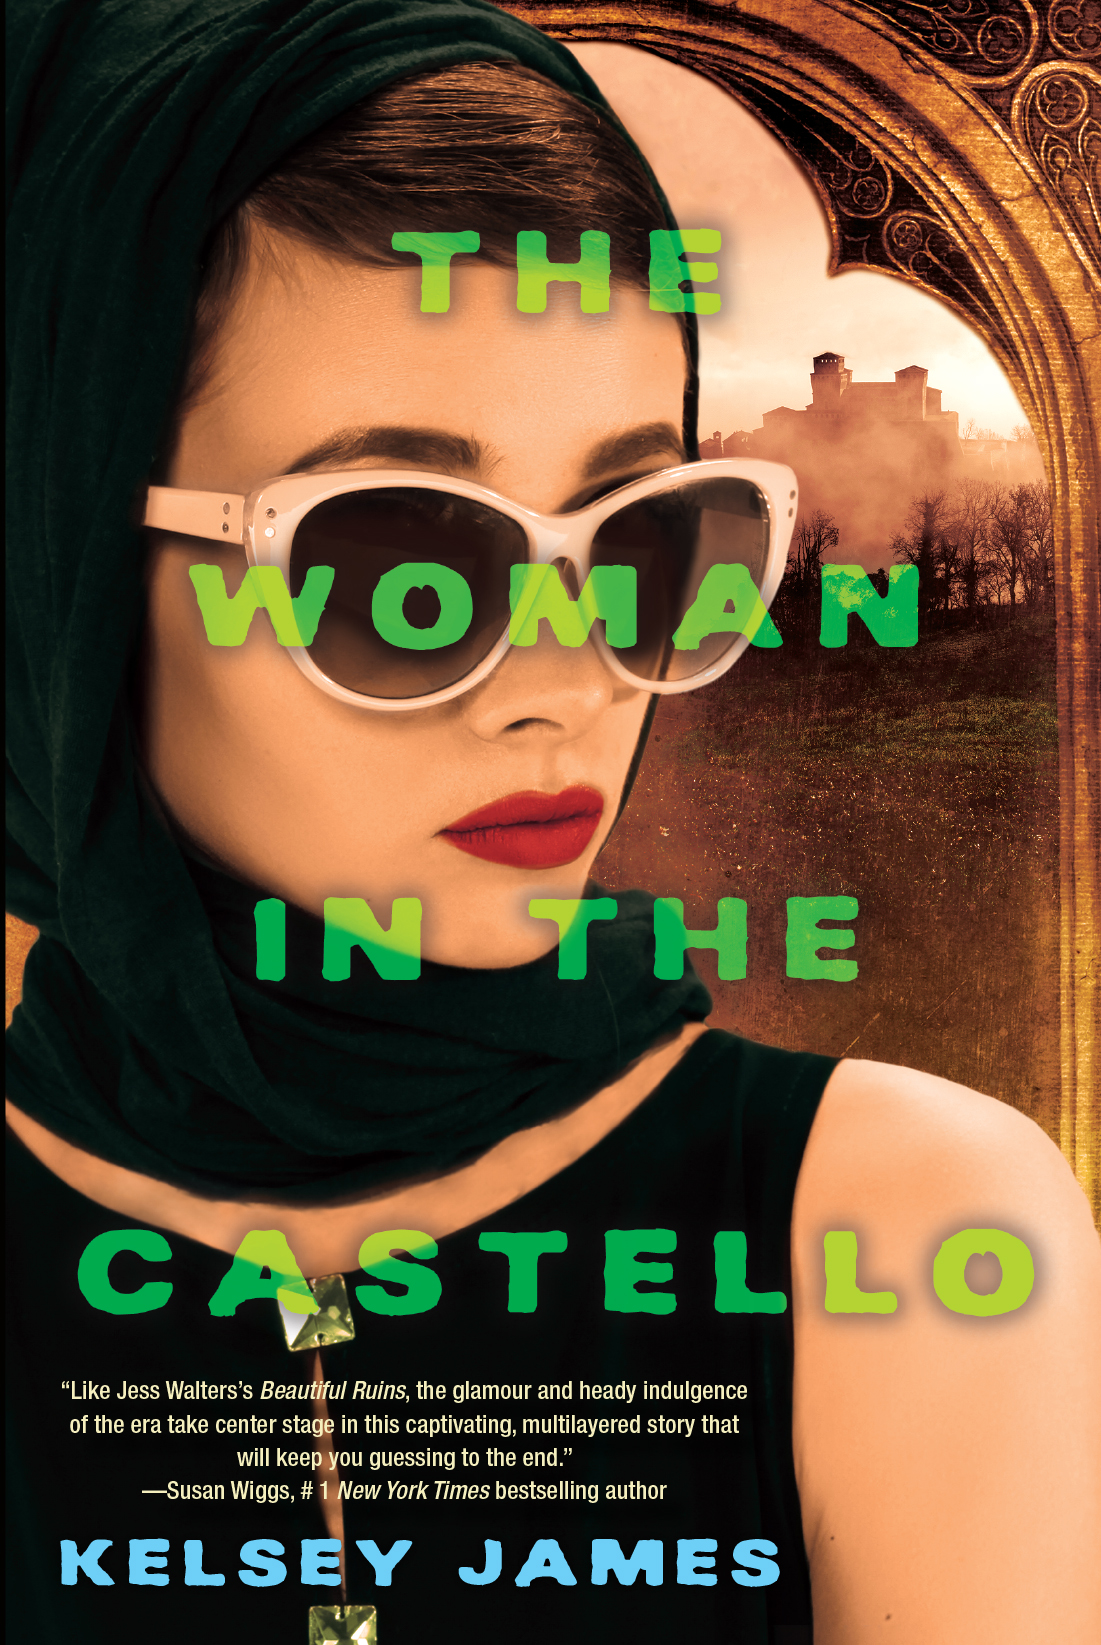 The Woman in the Castello by Kelsey James book cover